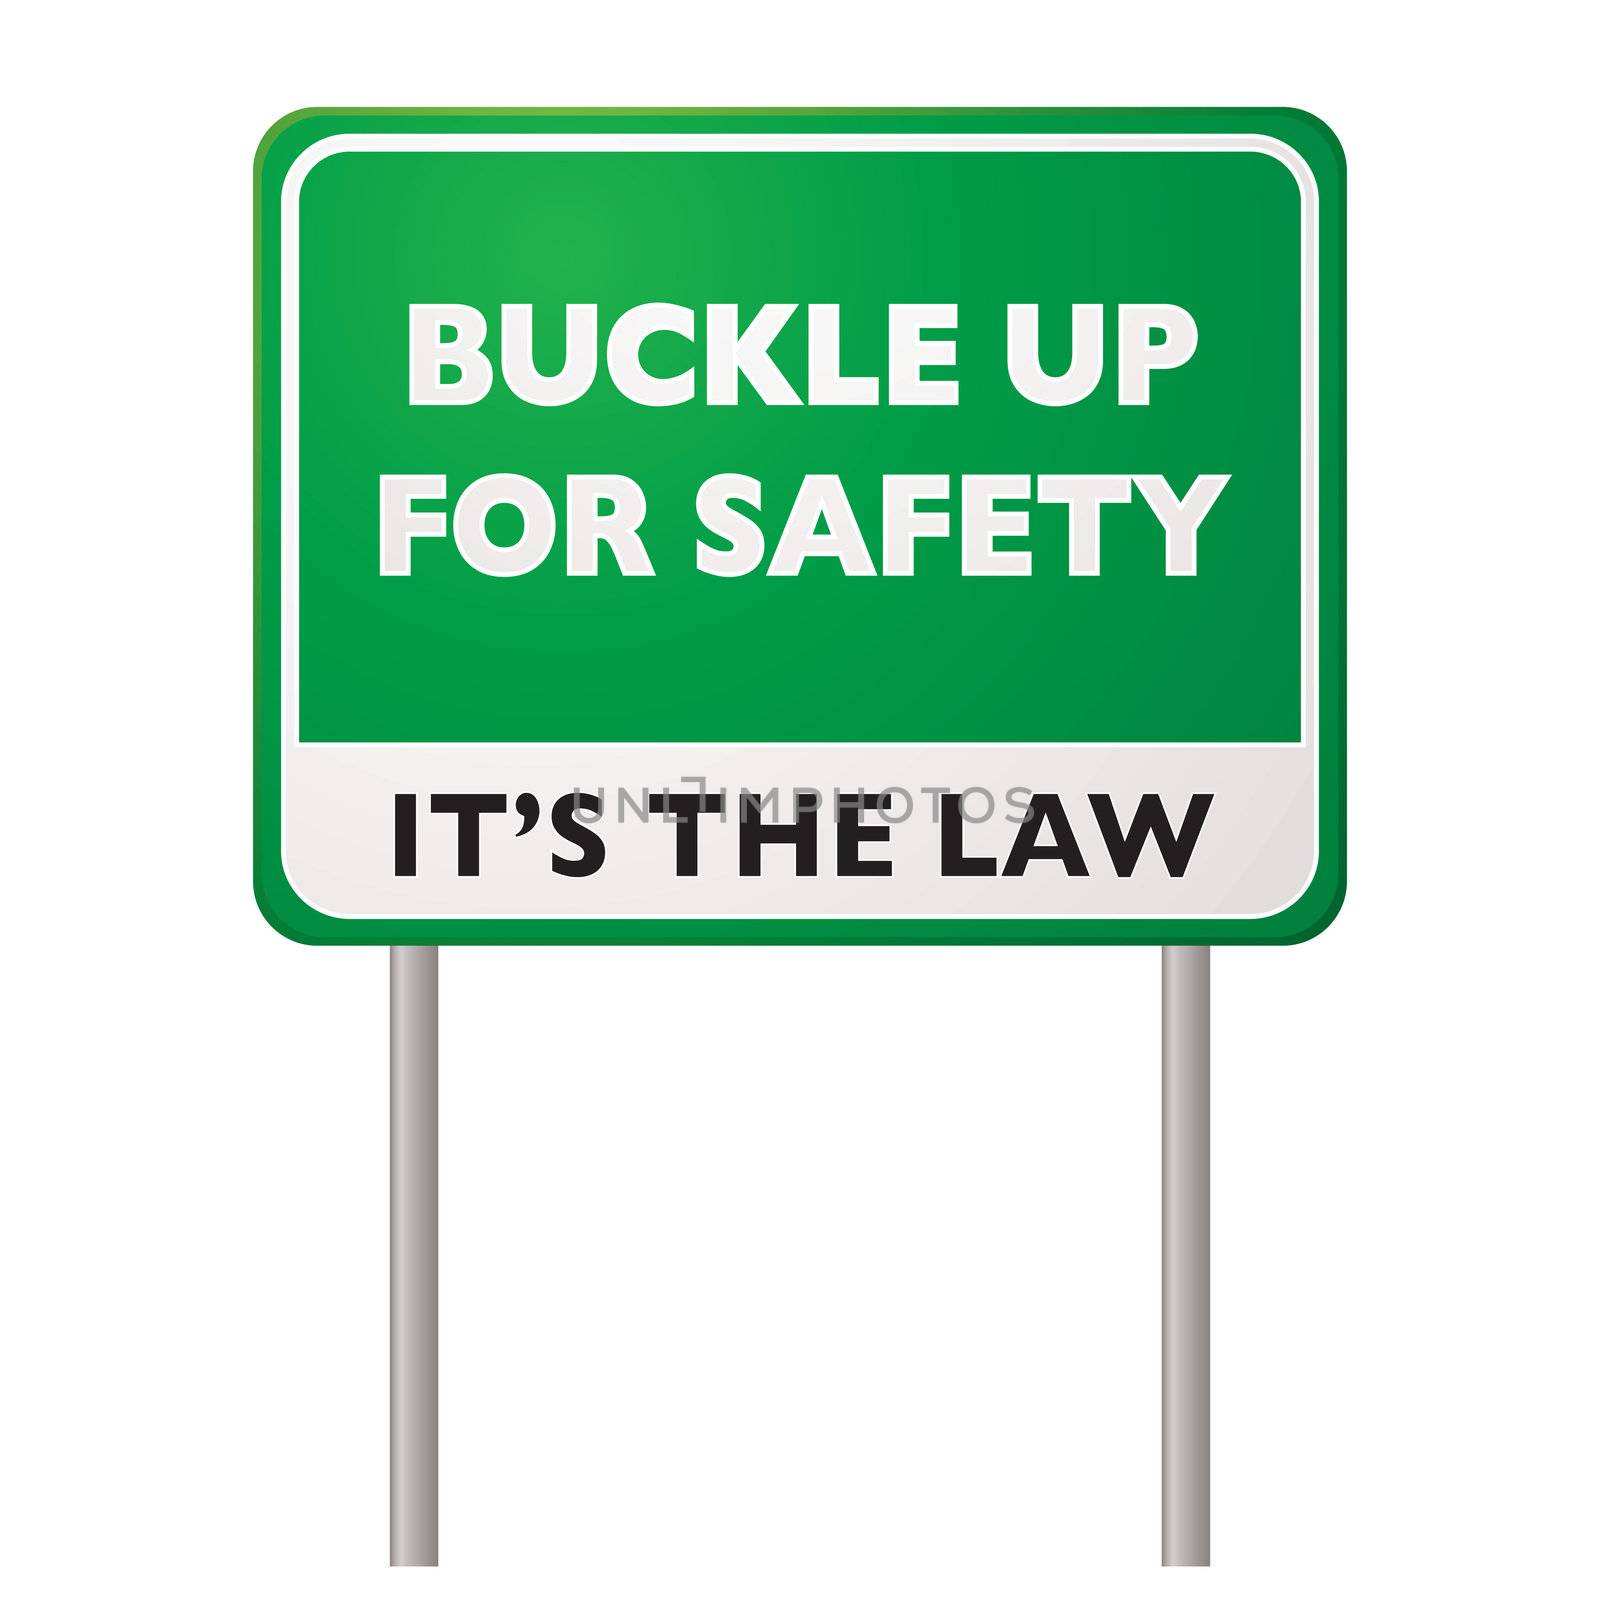 Buckle up road sign by nicemonkey